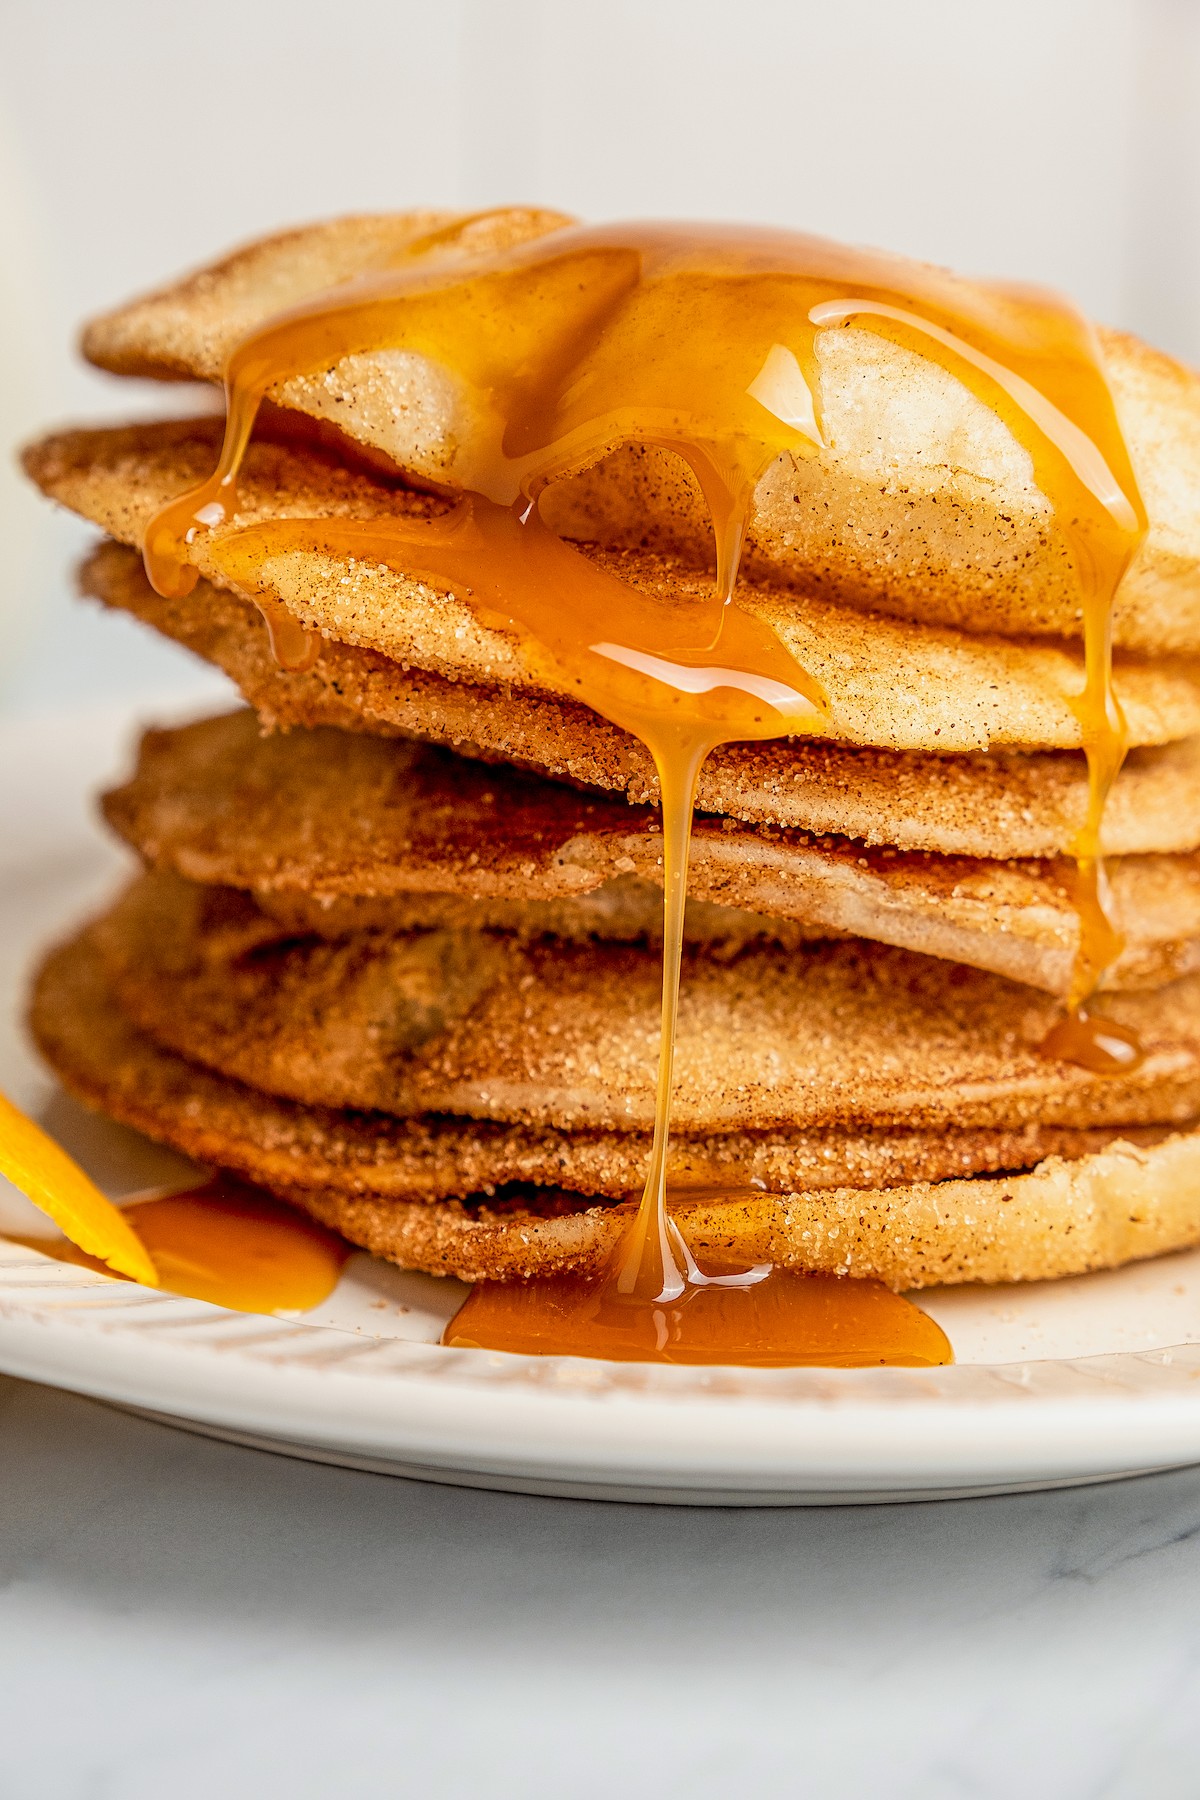 Caramel drizzled on top of a stack of buñuelos on a plate.